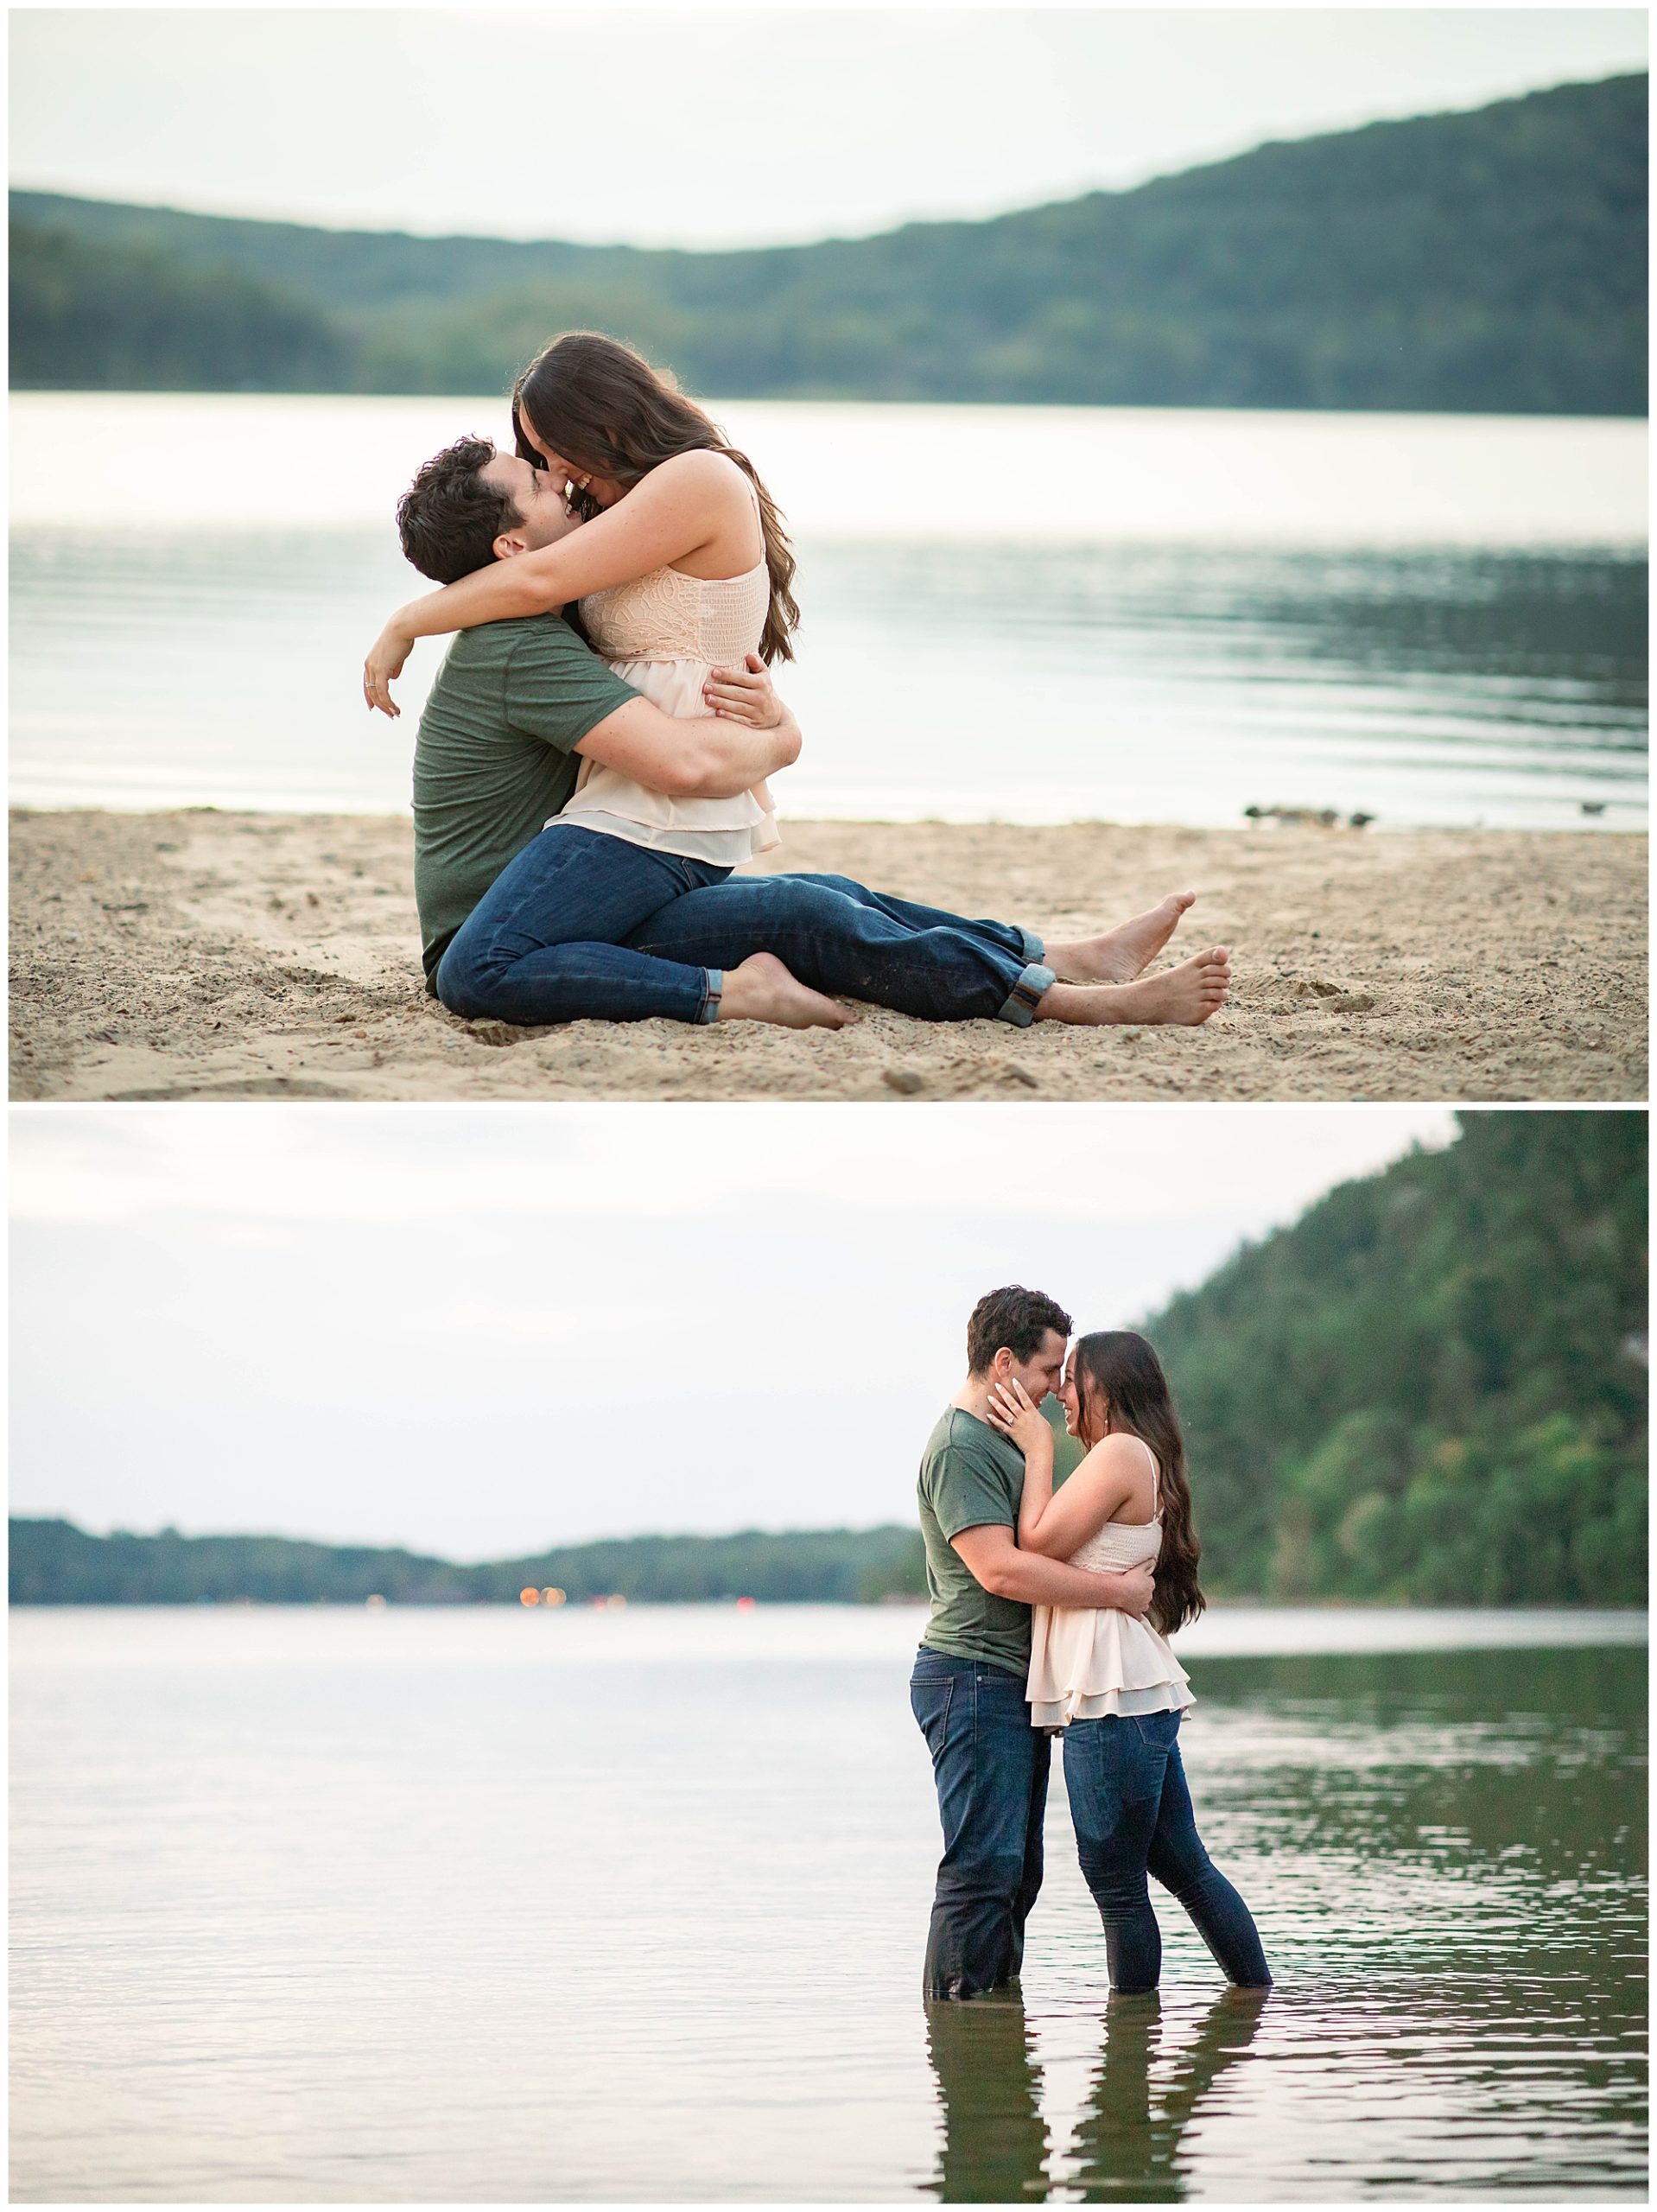 Devil's Lake Engagement Session on Beach with Bluffs